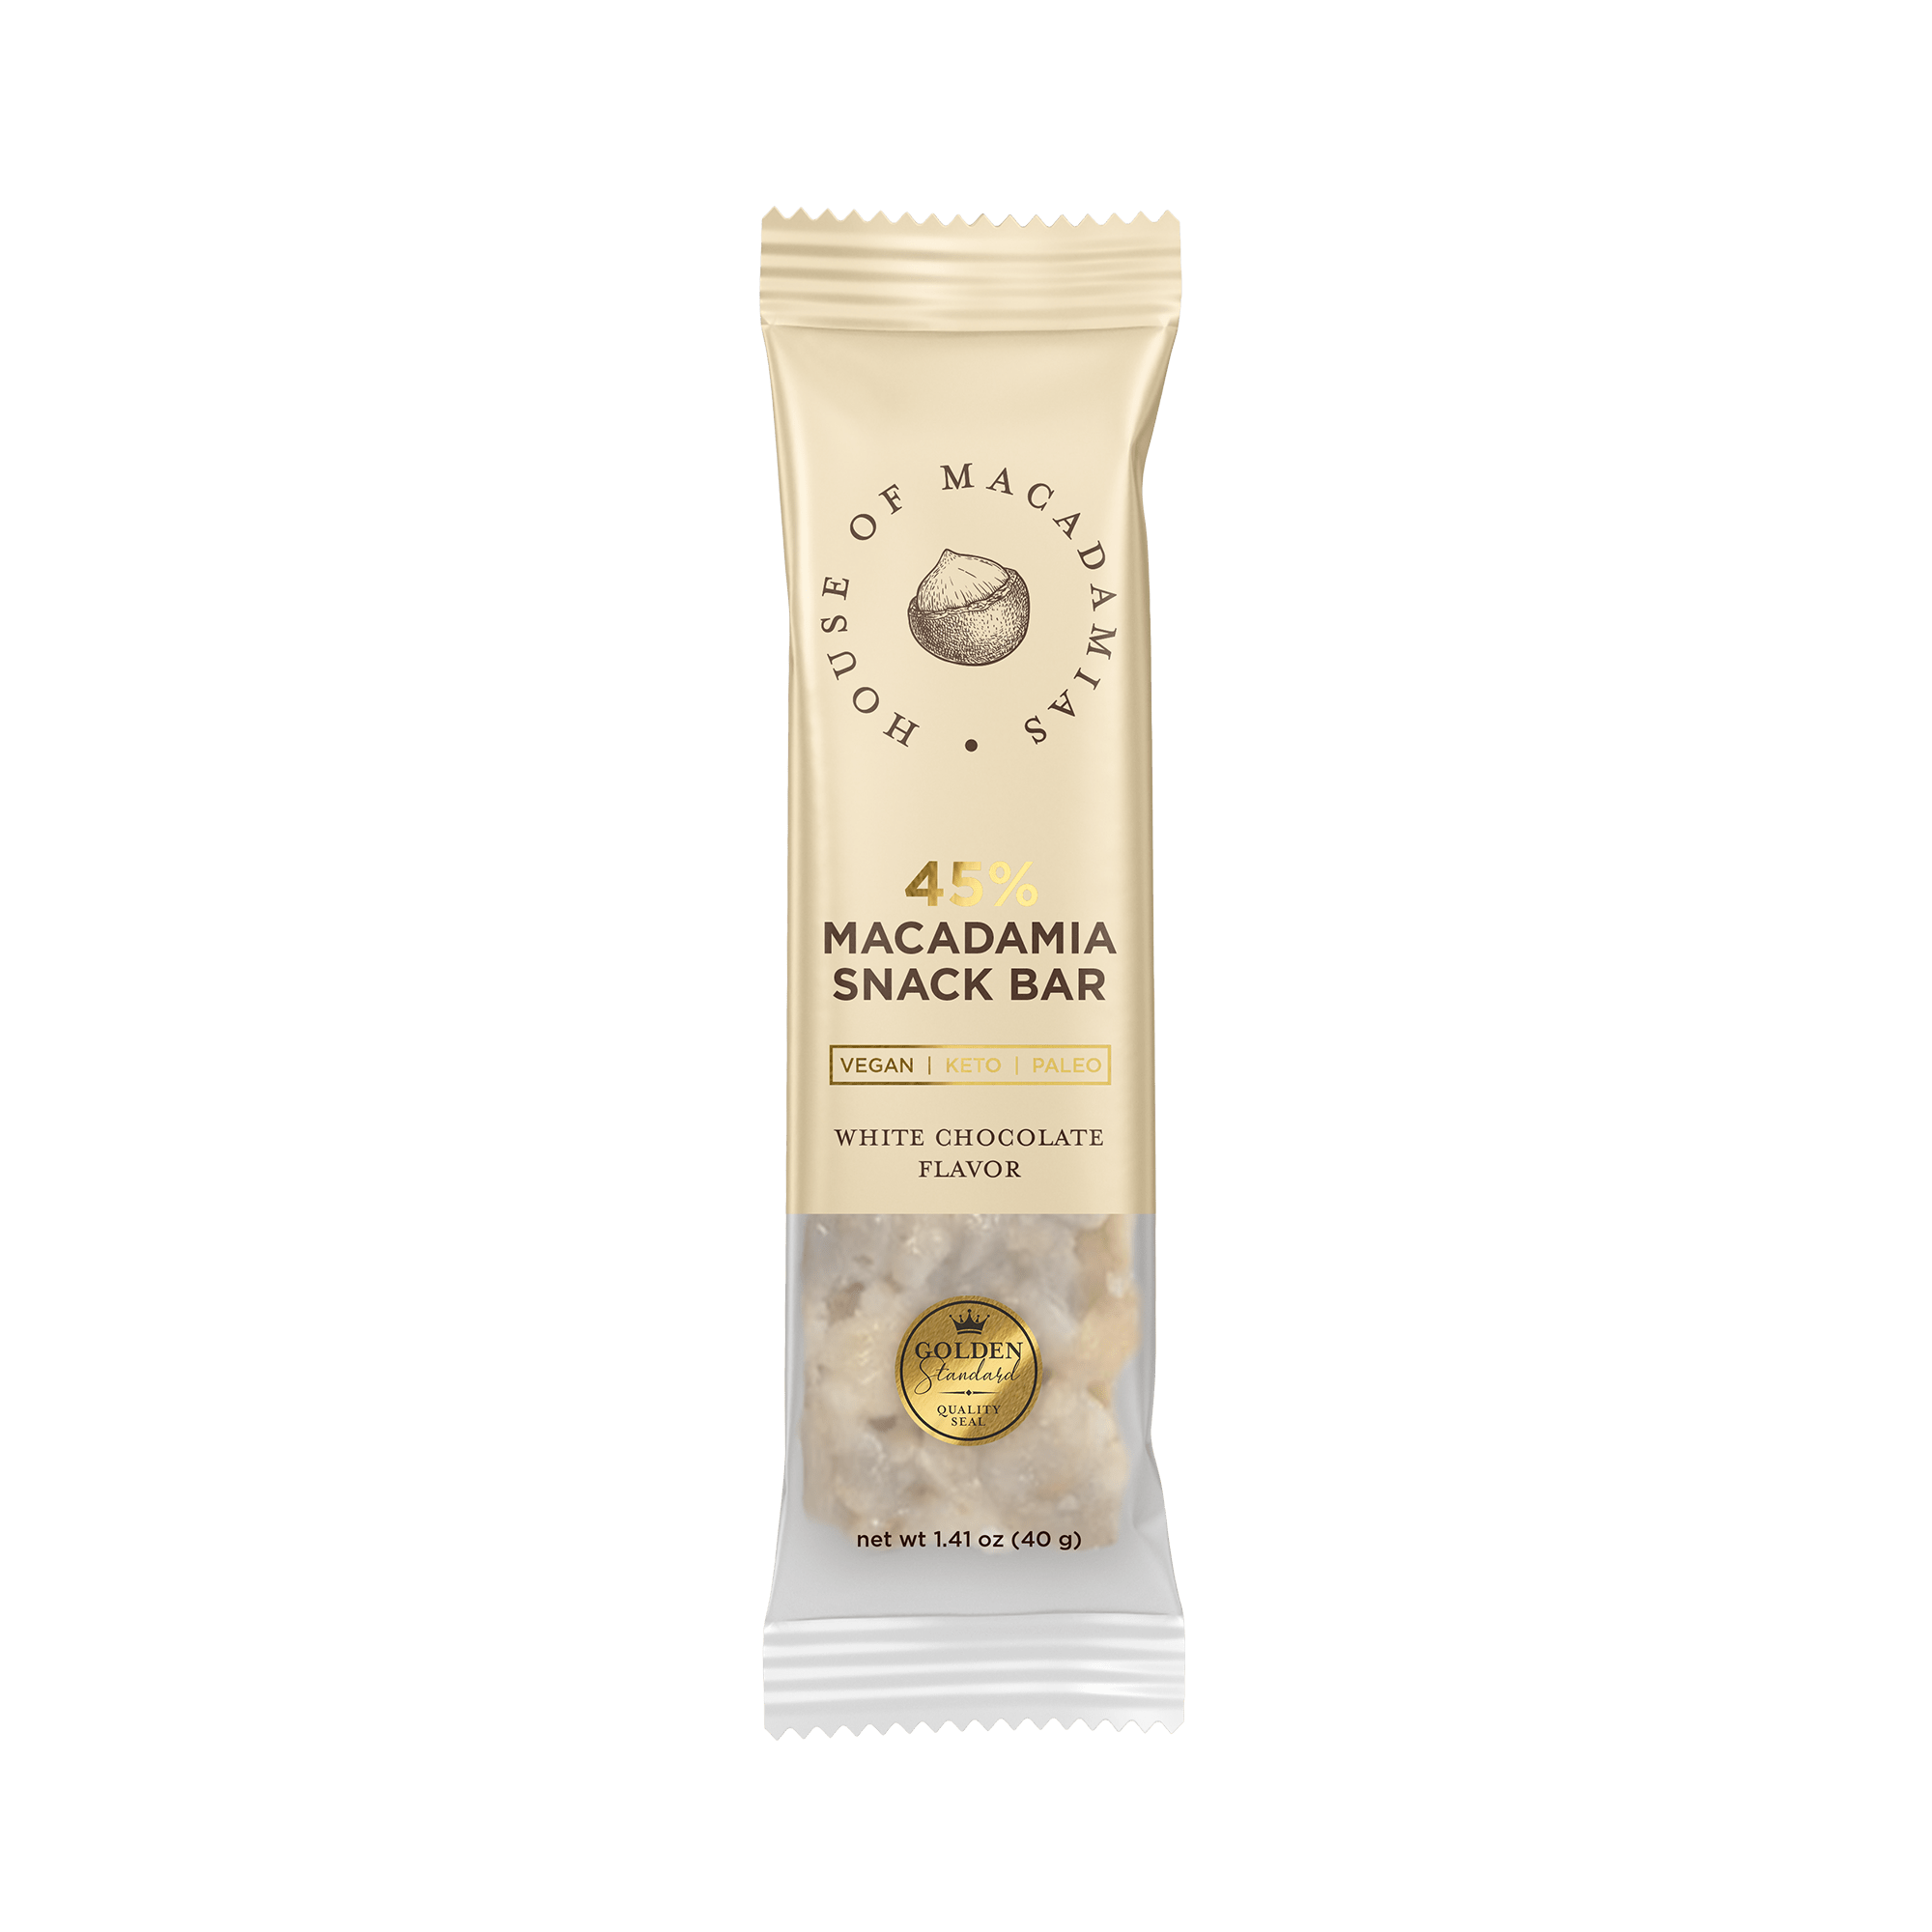 Macadamia Snack Bar Variety Pack (4 Flavors, 12 Bars) - House of Macadamias - almonds good for you